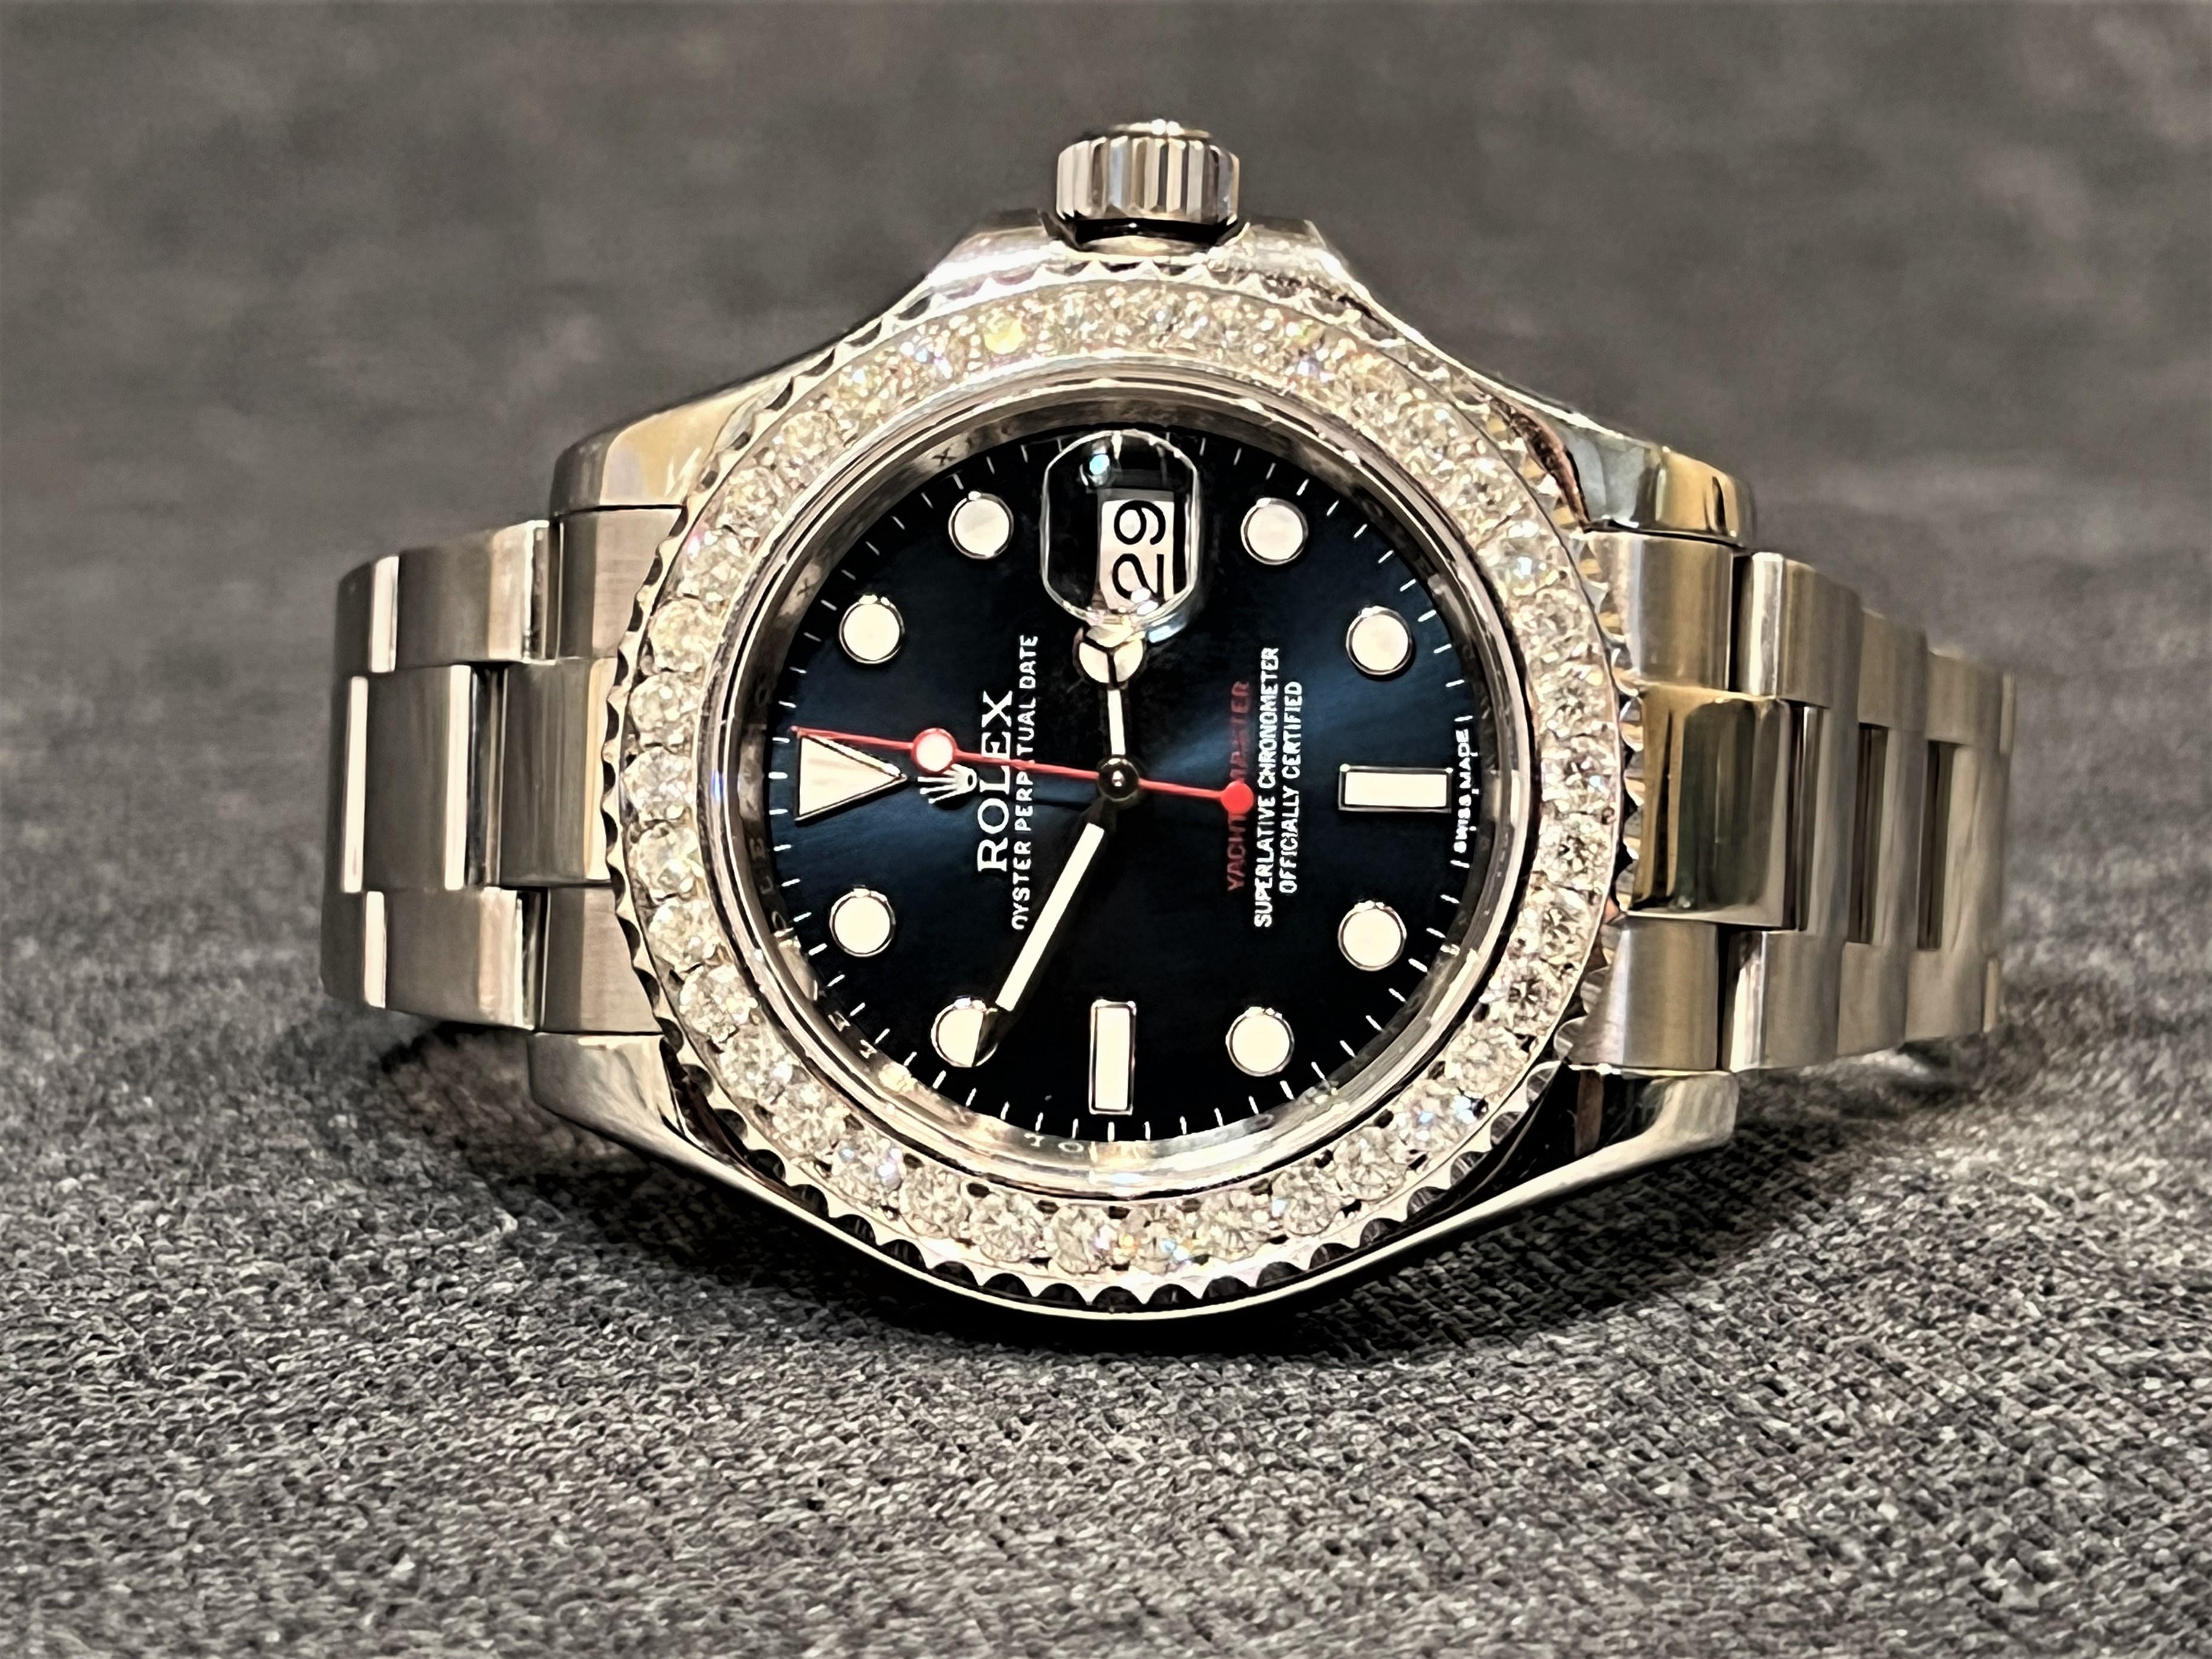 Modern Rolex Oyster Perpetual Yacht-Master 2.56 CTW Diamond Wristwatch For Sale